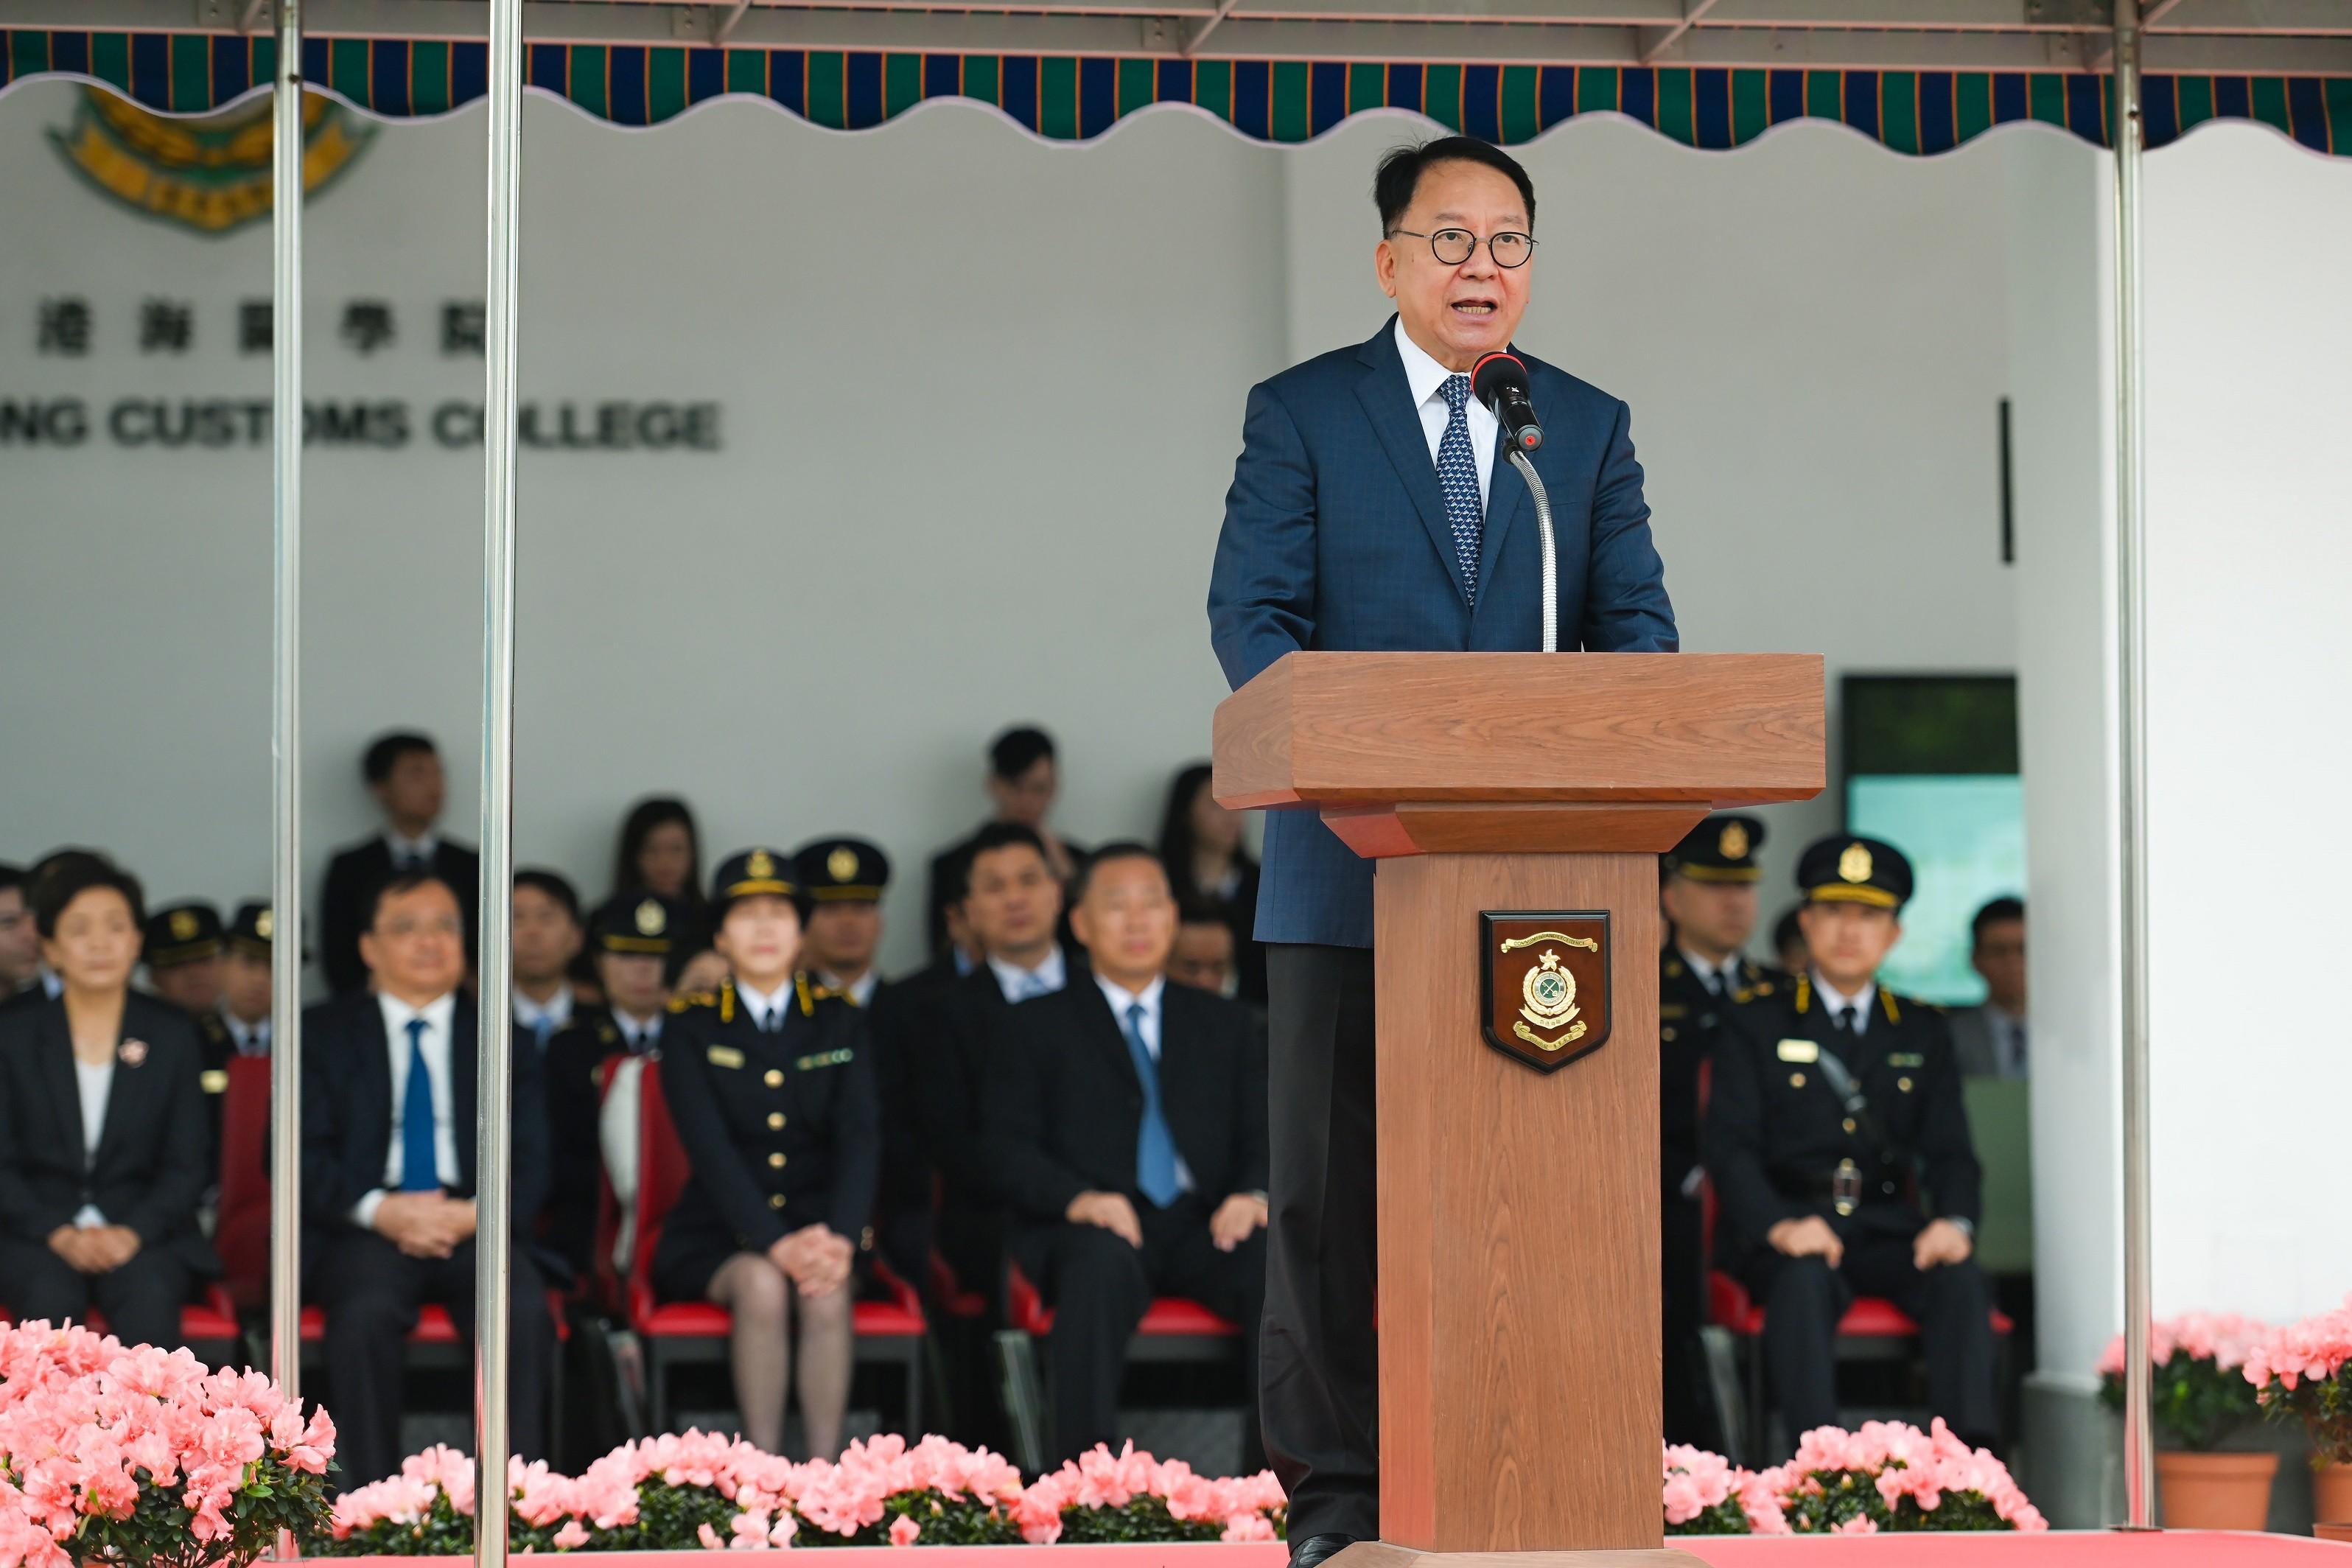 The Chief Secretary for Administration, Mr Chan Kwok-ki, delivers a speech at the Hong Kong Customs Passing-out Parade today (December 8).